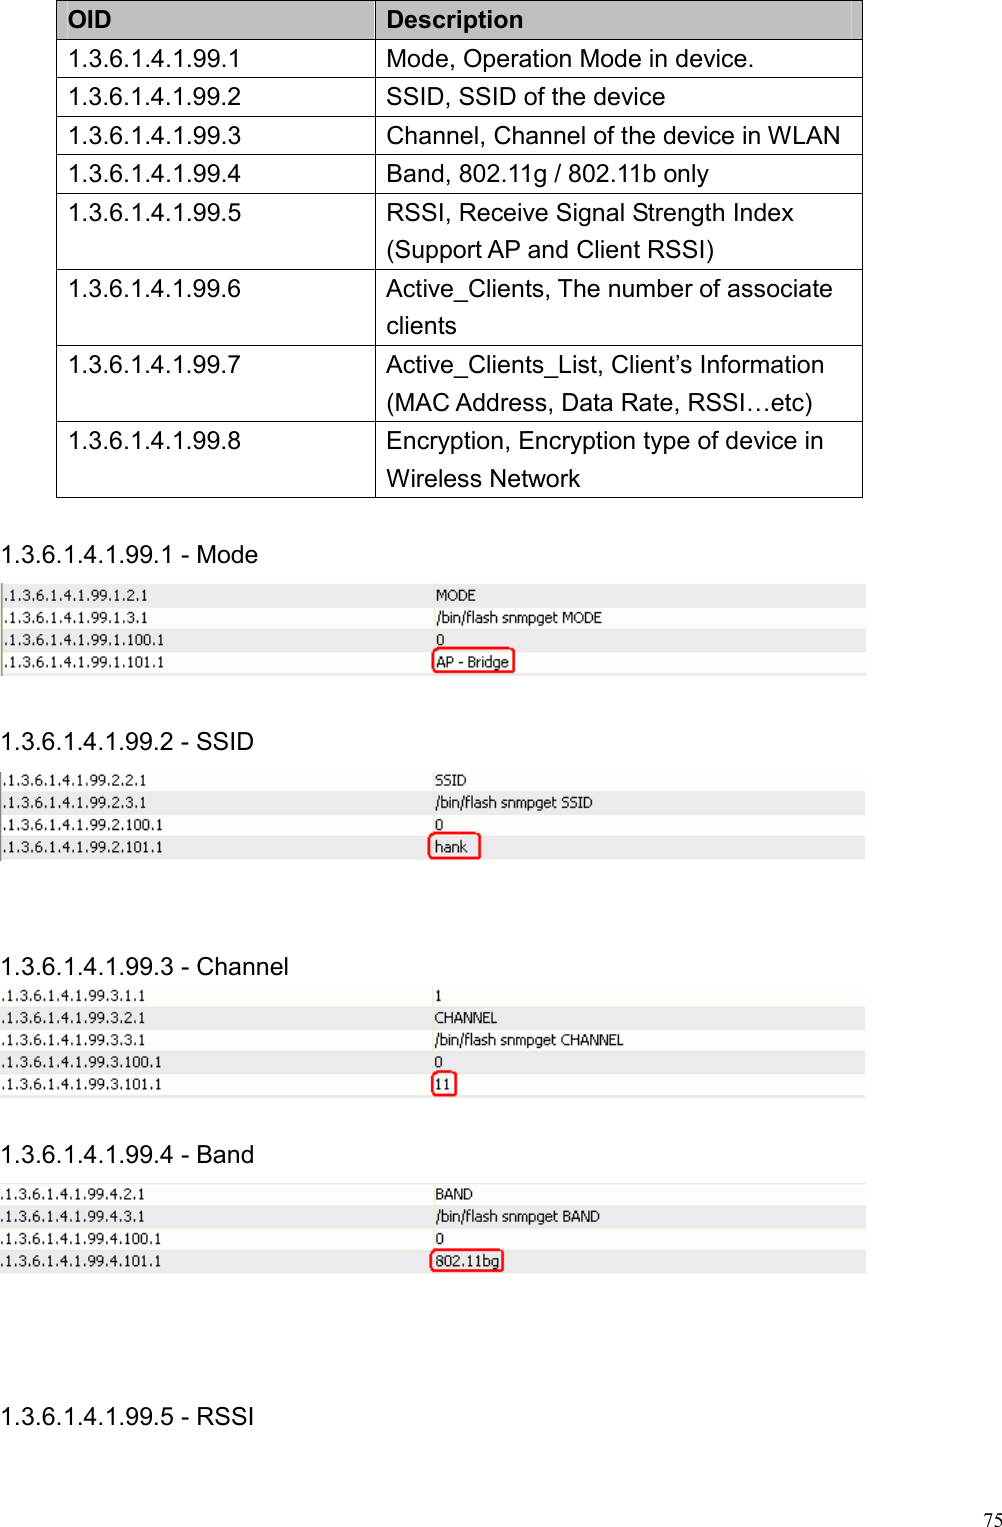  75OID  Description 1.3.6.1.4.1.99.1  Mode, Operation Mode in device. 1.3.6.1.4.1.99.2  SSID, SSID of the device 1.3.6.1.4.1.99.3  Channel, Channel of the device in WLAN 1.3.6.1.4.1.99.4  Band, 802.11g / 802.11b only   1.3.6.1.4.1.99.5  RSSI, Receive Signal Strength Index (Support AP and Client RSSI) 1.3.6.1.4.1.99.6  Active_Clients, The number of associate clients  1.3.6.1.4.1.99.7  Active_Clients_List, Client’s Information (MAC Address, Data Rate, RSSI…etc) 1.3.6.1.4.1.99.8  Encryption, Encryption type of device in Wireless Network    1.3.6.1.4.1.99.1 - Mode   1.3.6.1.4.1.99.2 - SSID    1.3.6.1.4.1.99.3 - Channel   1.3.6.1.4.1.99.4 - Band     1.3.6.1.4.1.99.5 - RSSI 